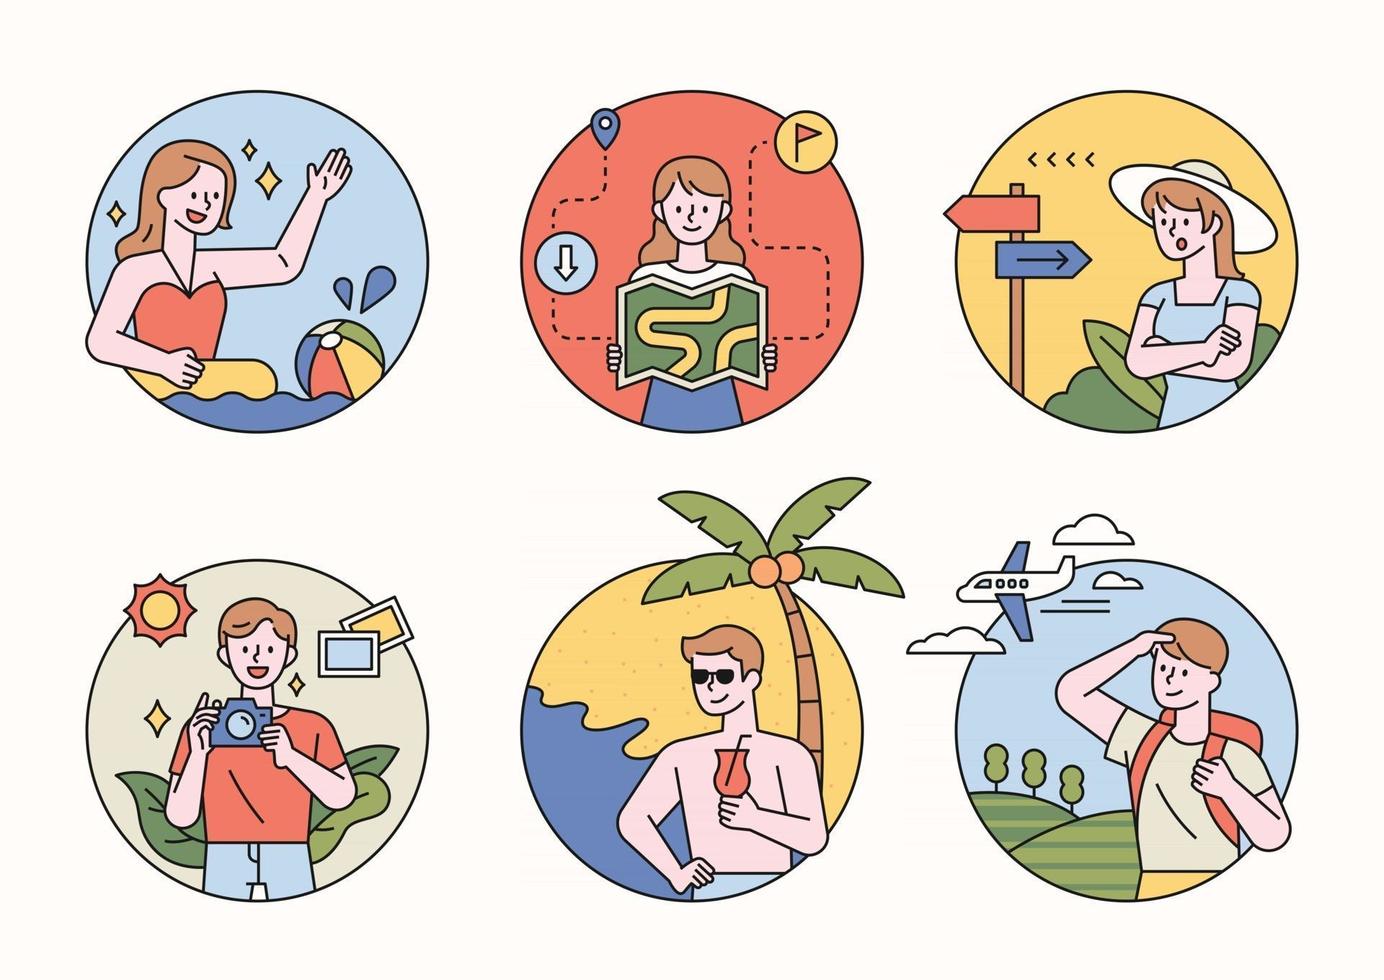 Character design on vacation inside a circle. People swimming, drinking cocktails on the beach, going abroad, looking at maps, finding directions and taking pictures. flat design vector illustration.